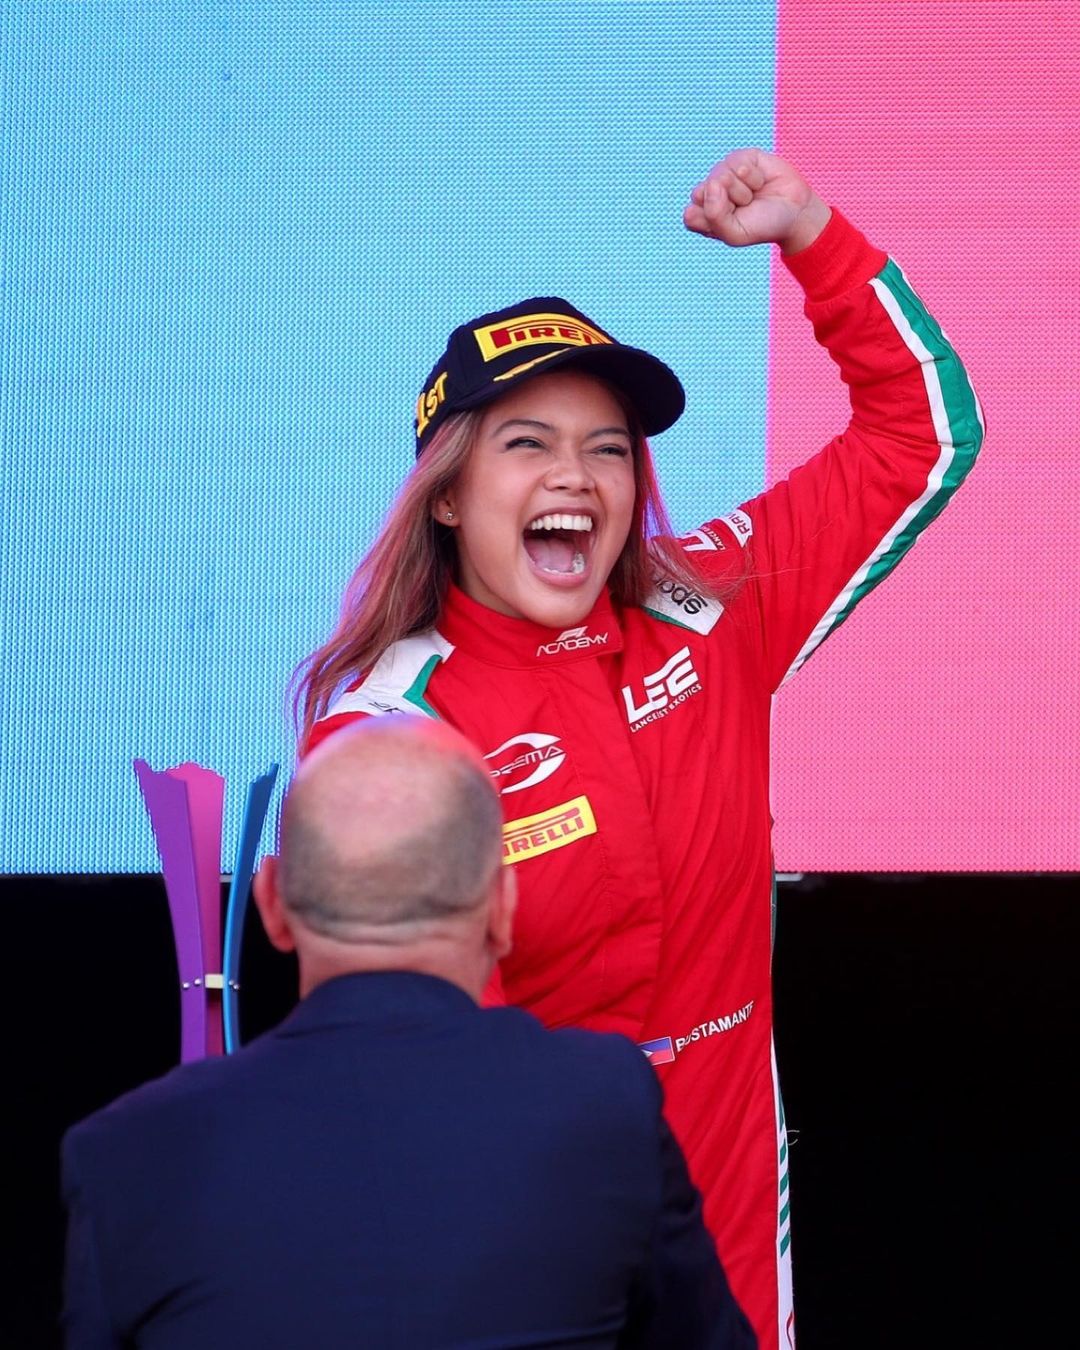 Bianca Bustamante celebrating her first victory in the F1 Academy